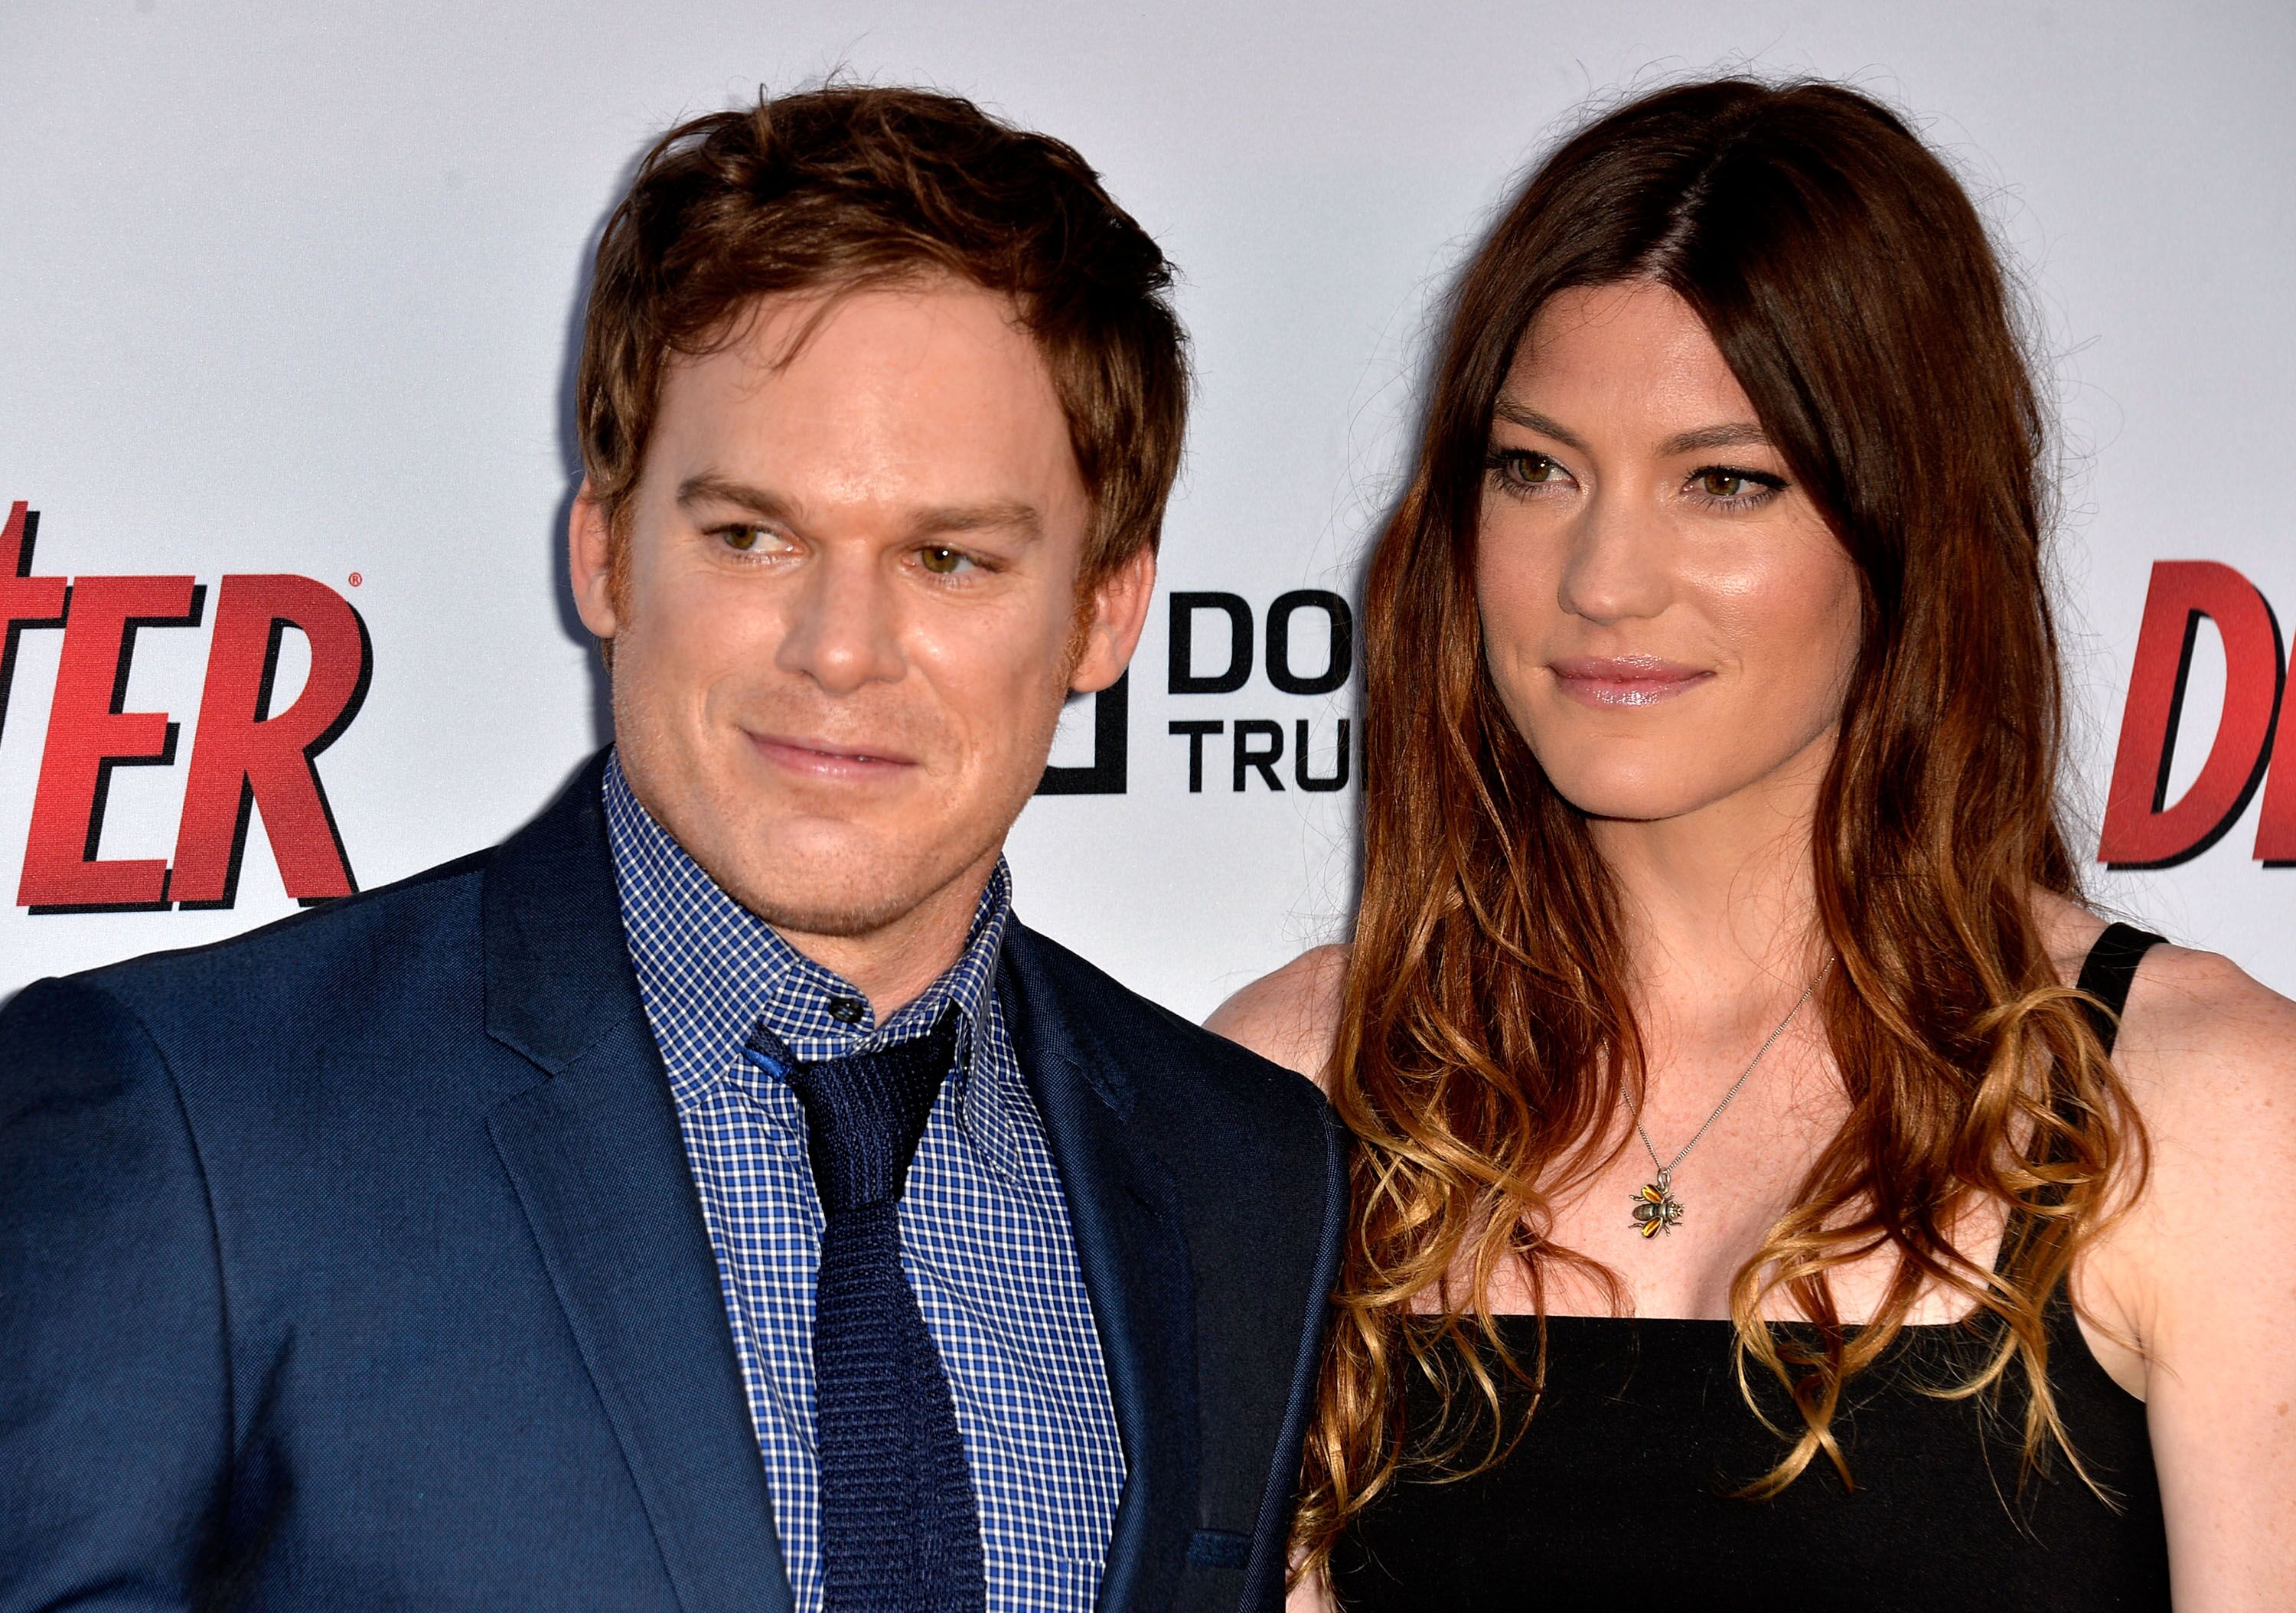 Michael C. Hall and Jennifer Carpenter arrivesat the Showtime Celebrates 8 Seasons Of "Dexter" at Milk Studios on June 15, 2013 in Hollywood, California. | Source: Getty Images